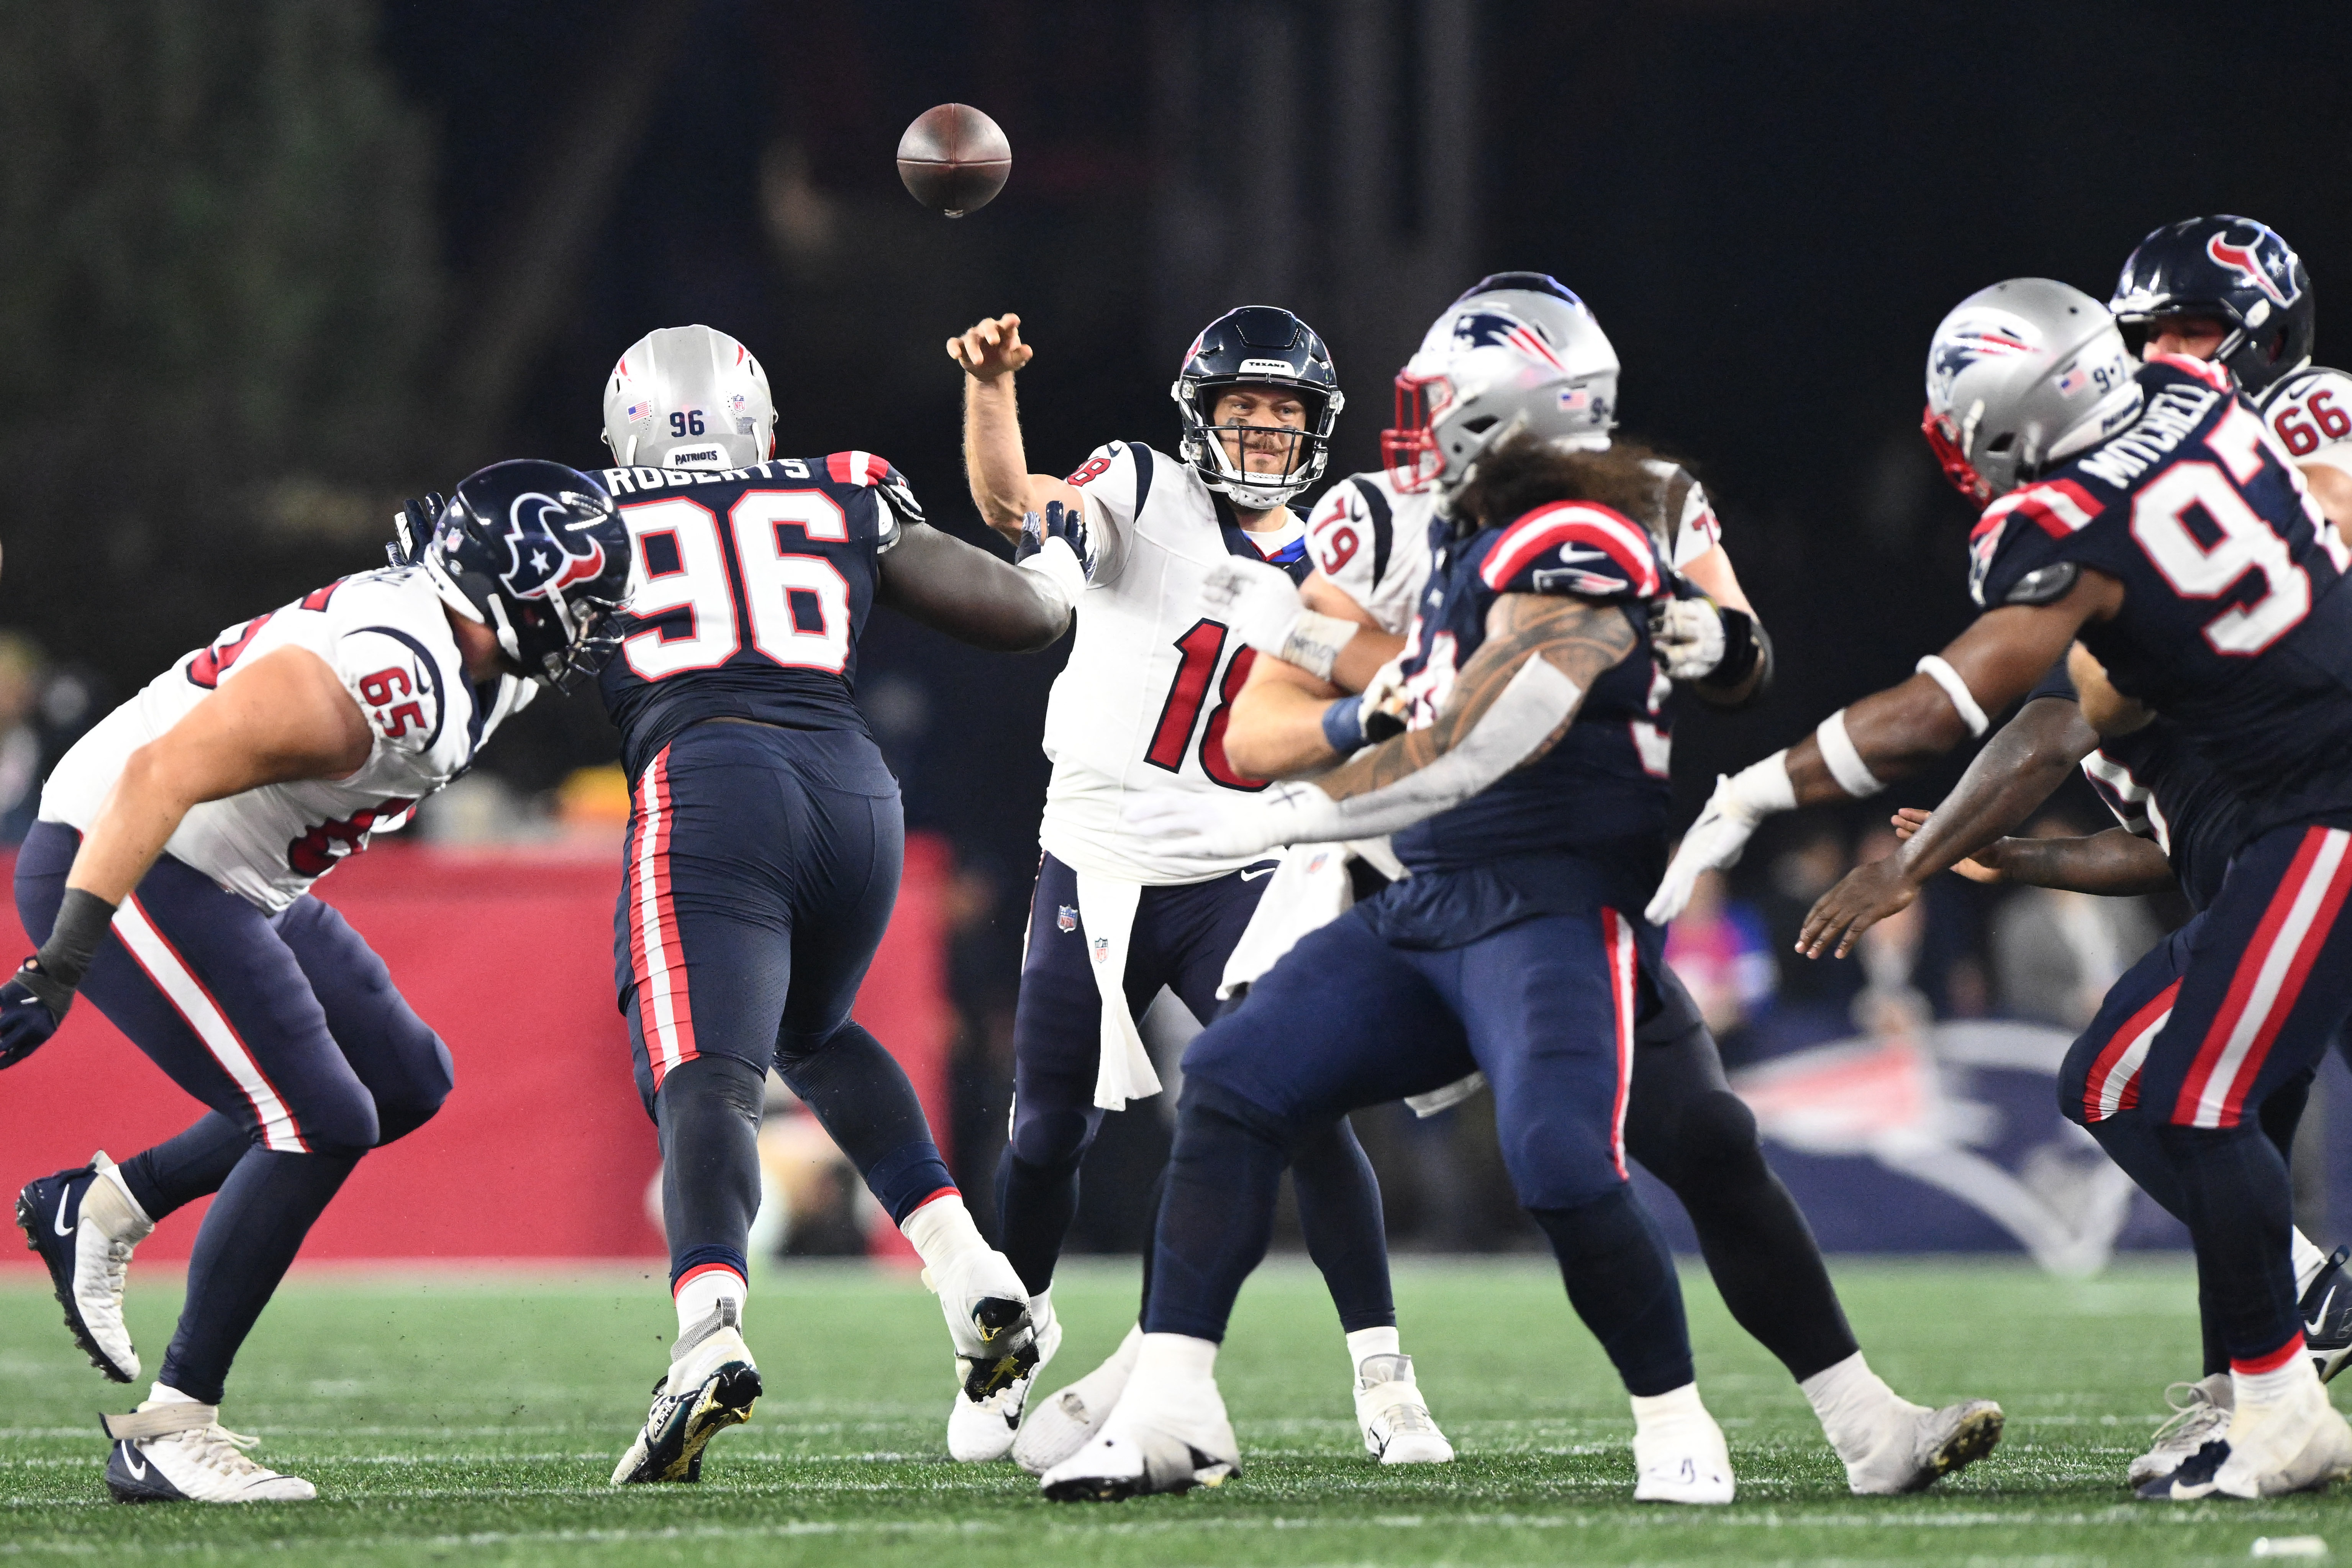 Texans vs Patriots Preseason game: Who is predicted to win the first game  of the NFL preseason?